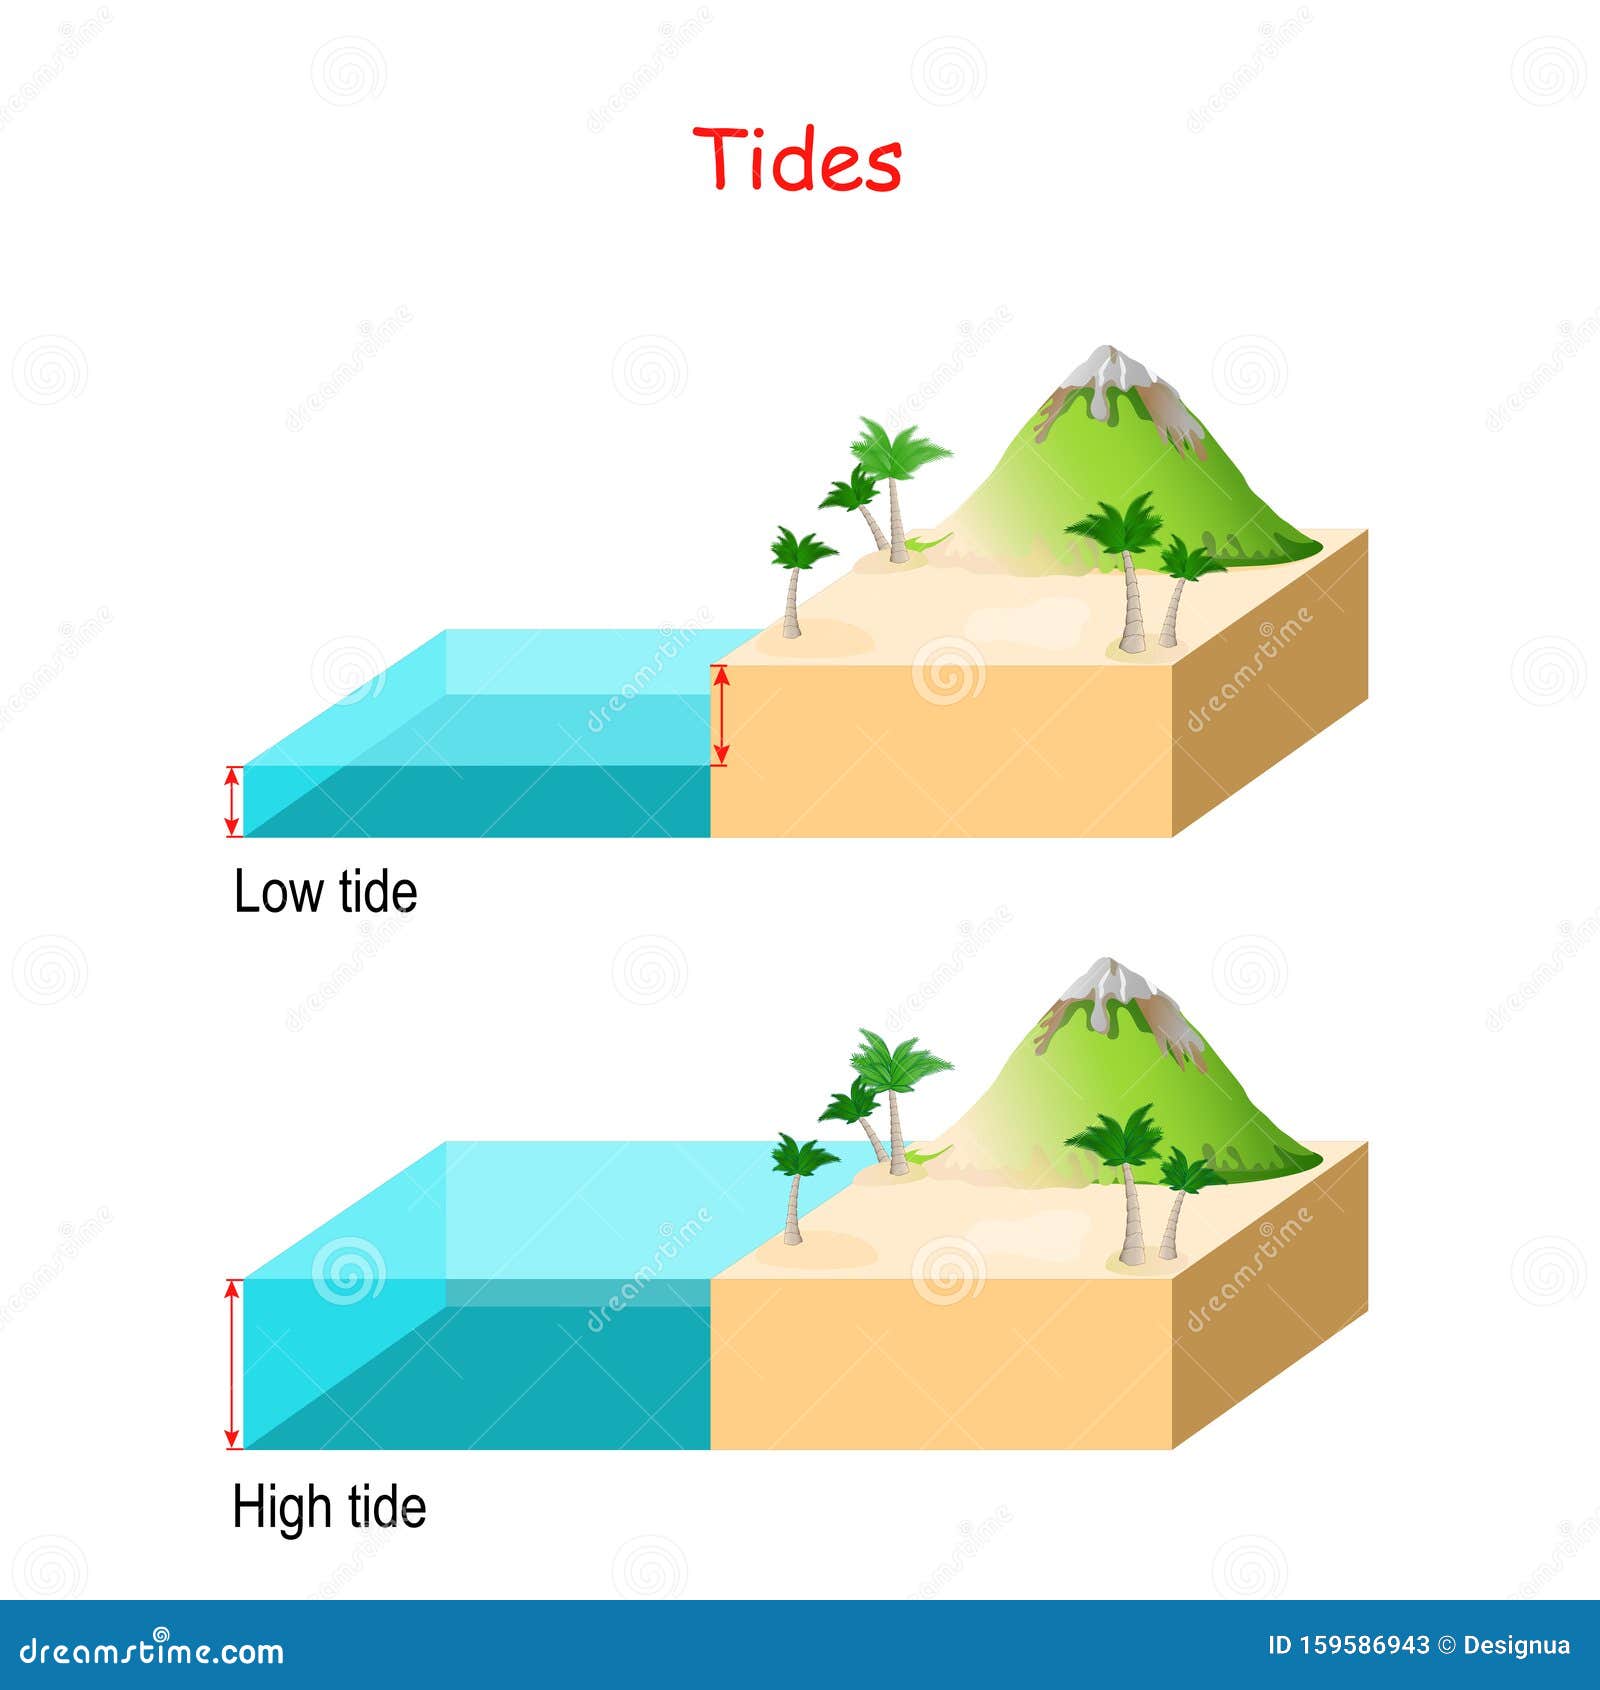 high and low tides. water Ã¢â¬â¹Ã¢â¬â¹level